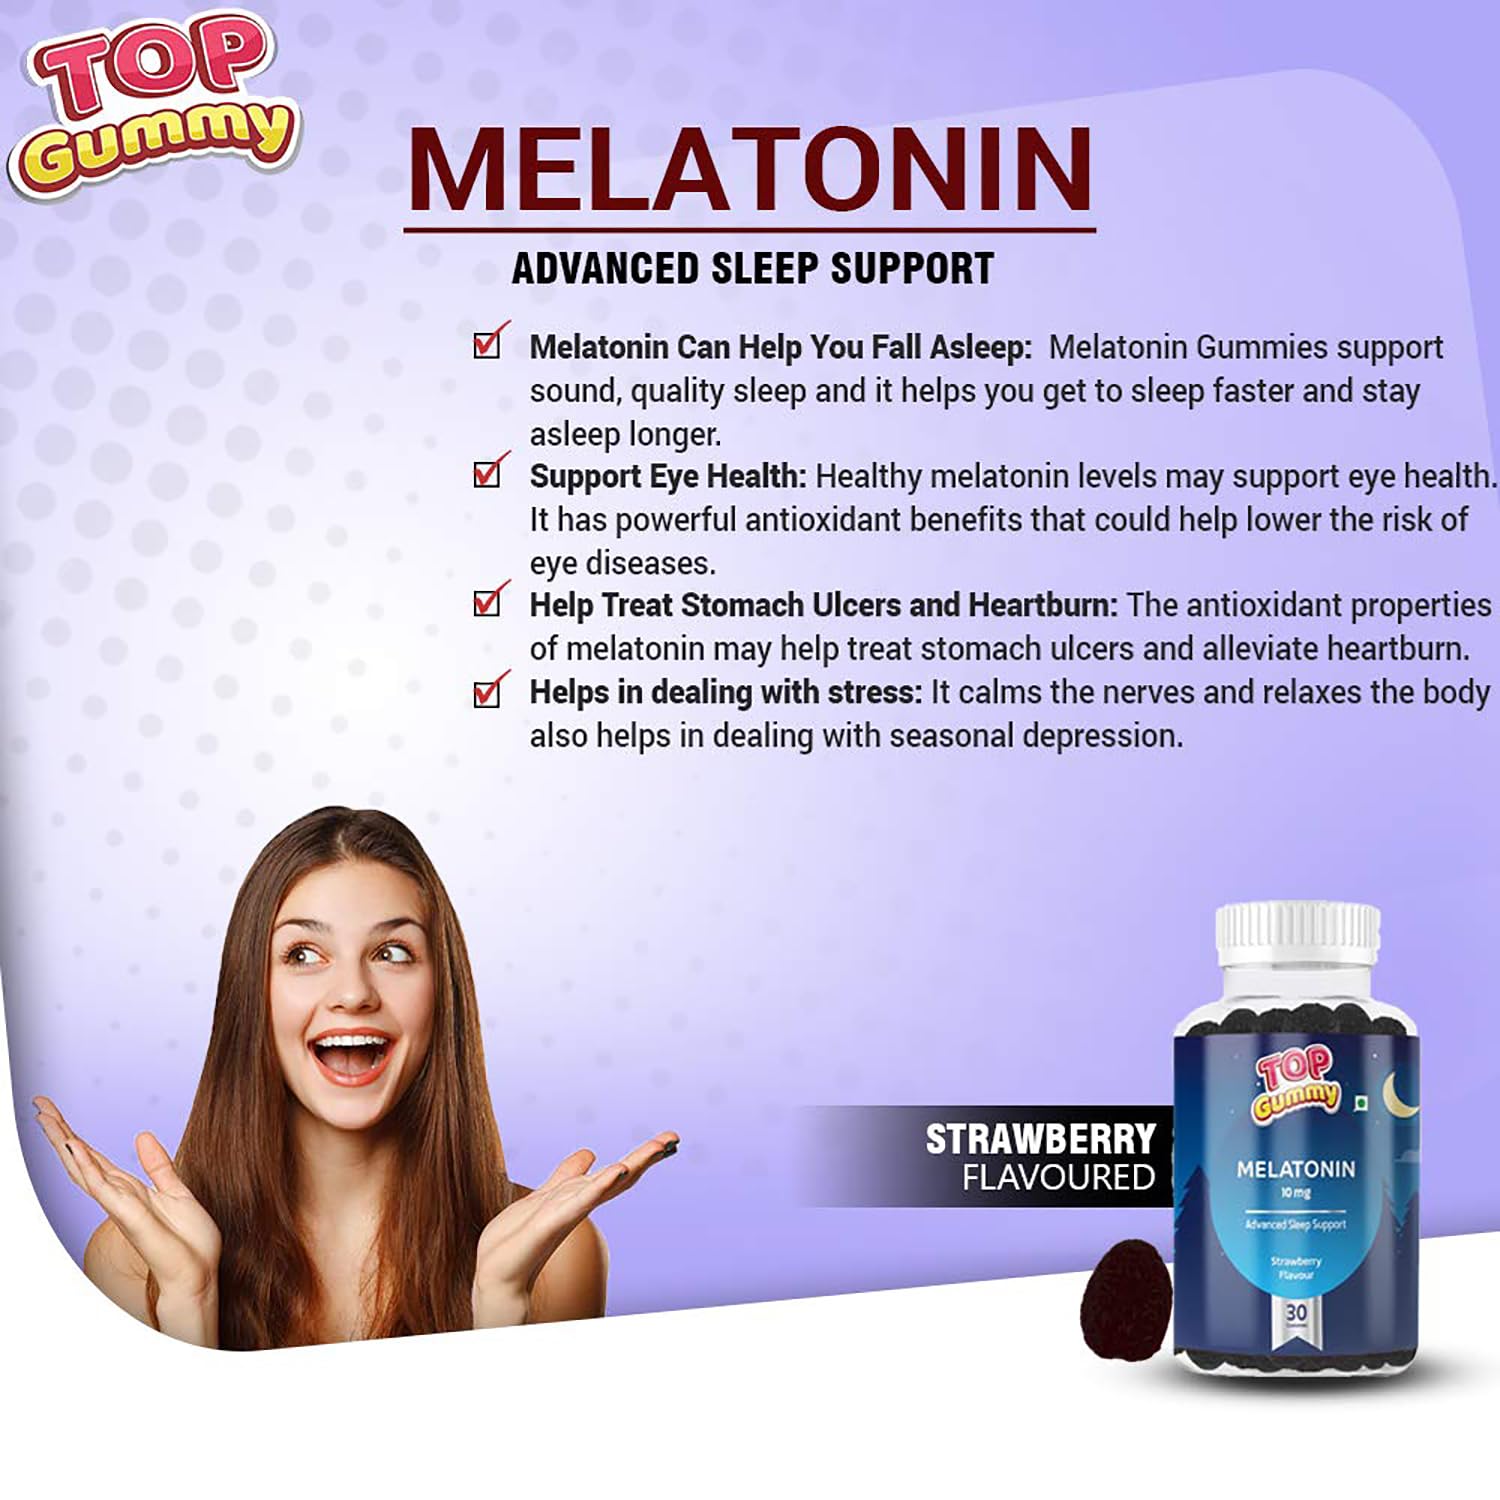 Top Gummy Melatonin 10mg | Advanced Sleep Support, Stay Asleep Longer, Easy to Take, Dissolves in Mouth, Faster Absorption | Gluten, Soy & Dairy Free – 30 Gummies (Strawberry Flavour) (Pack of 3)